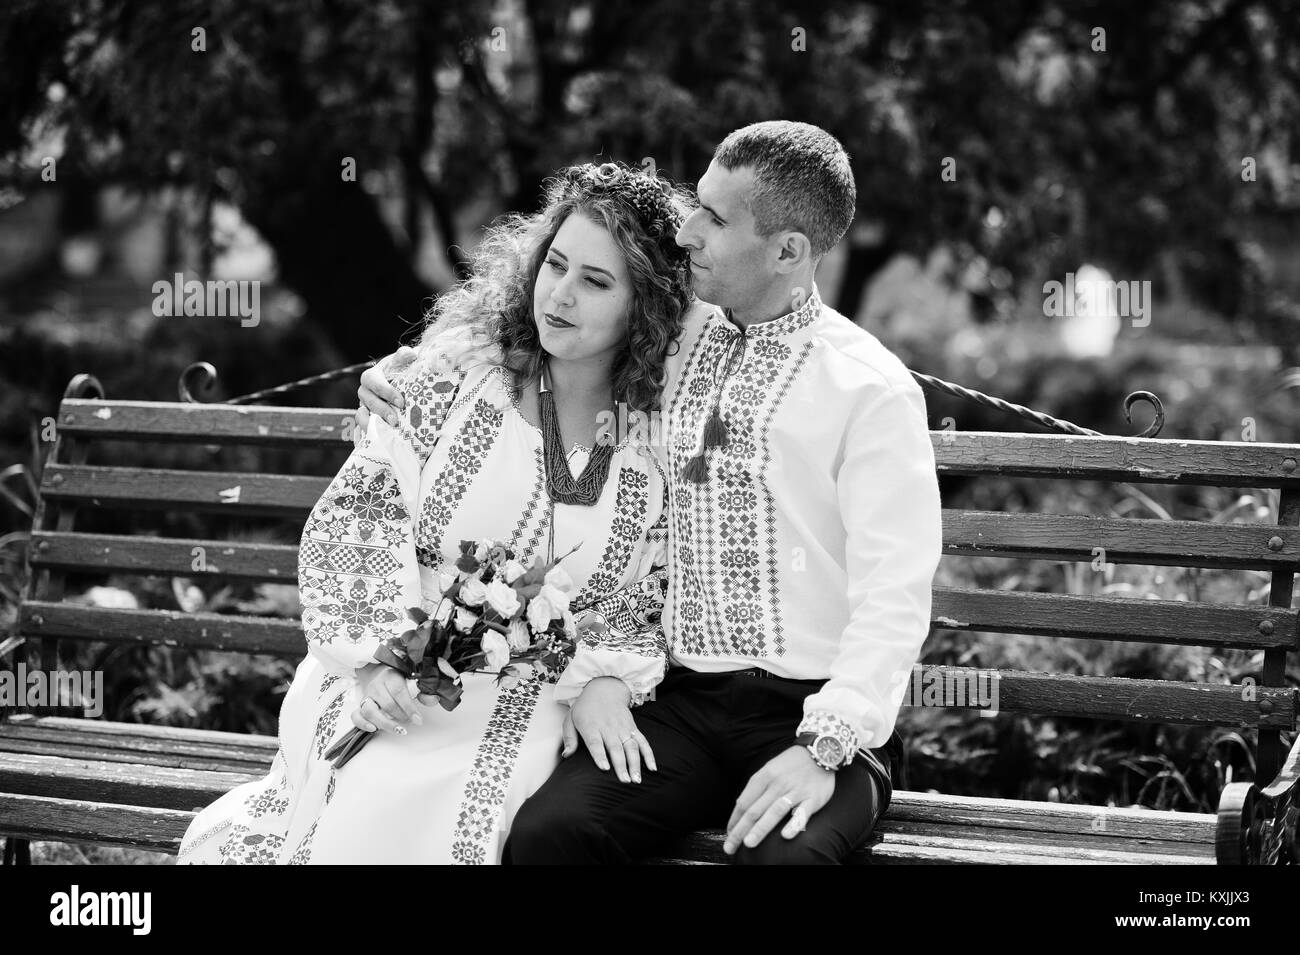 Cute wedding couple in ukrainian traditional clothes sitting on the bench in the town and spending time together. Black and white photo. Stock Photo